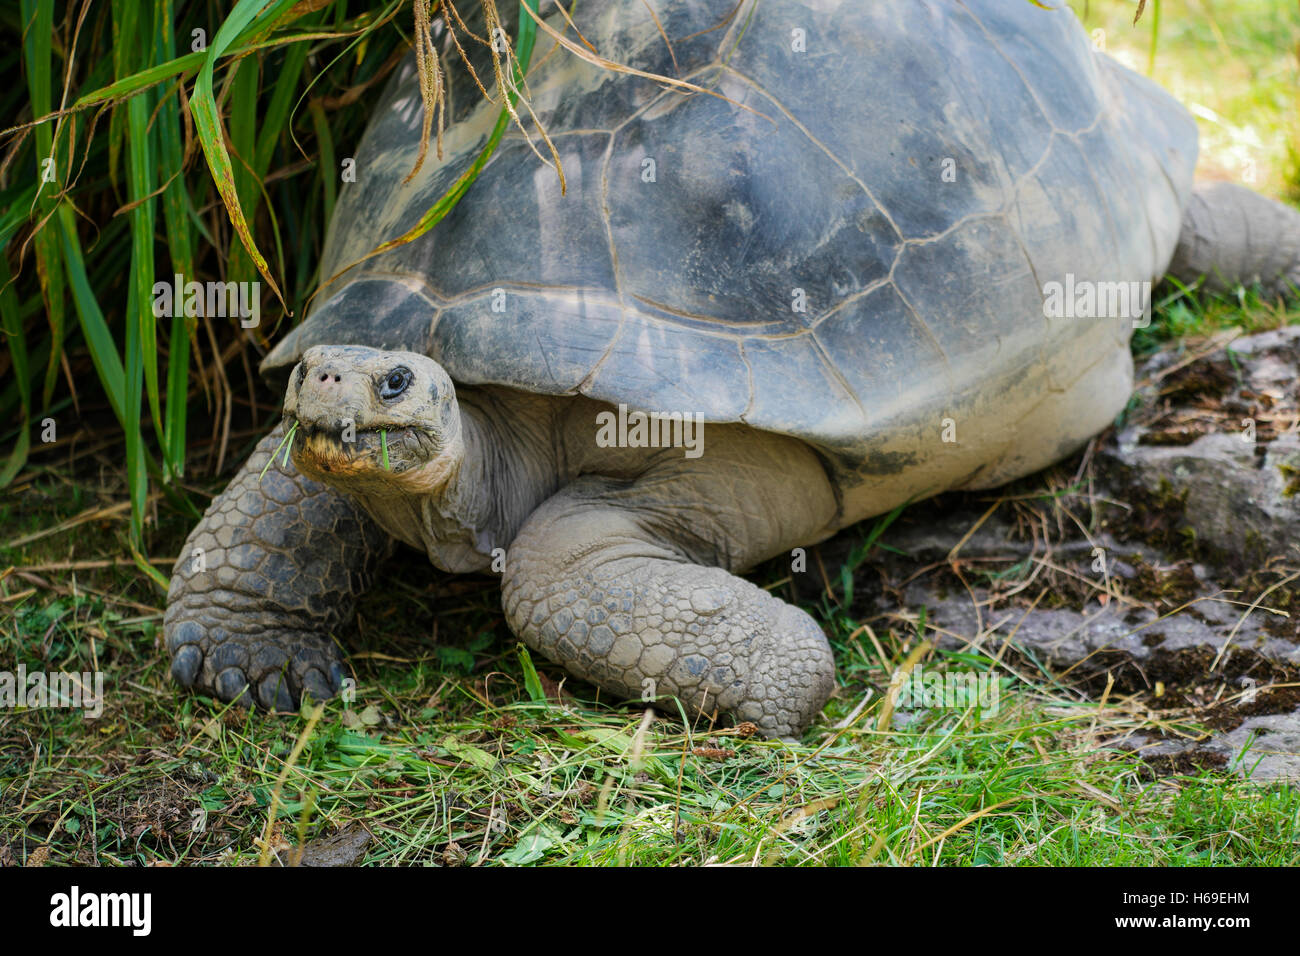 A Galapagos tortoise eating some grass in the zoo Stock Photo